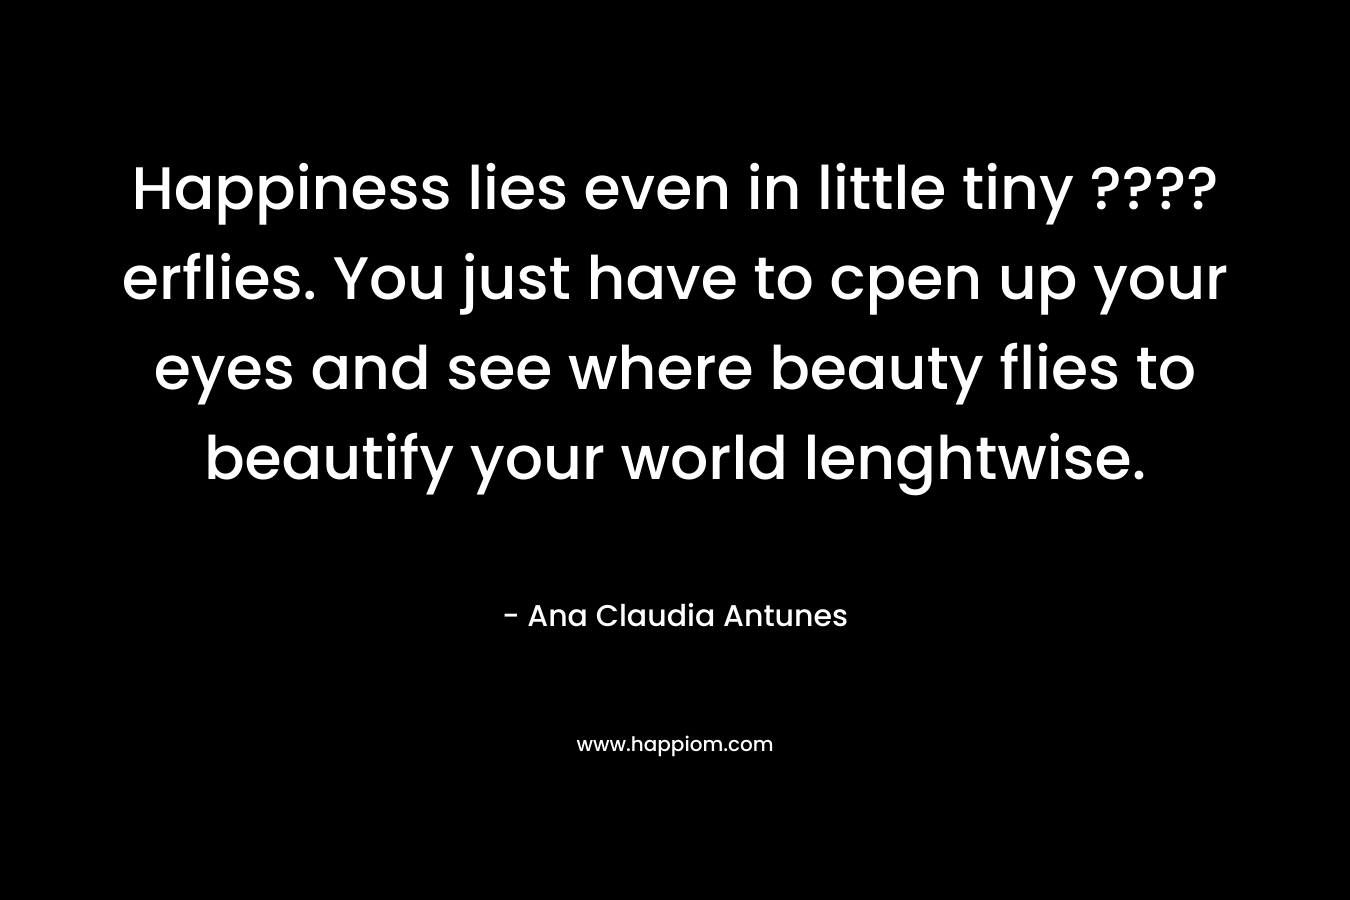 Happiness lies even in little tiny ????erflies. You just have to cpen up your eyes and see where beauty flies to beautify your world lenghtwise.